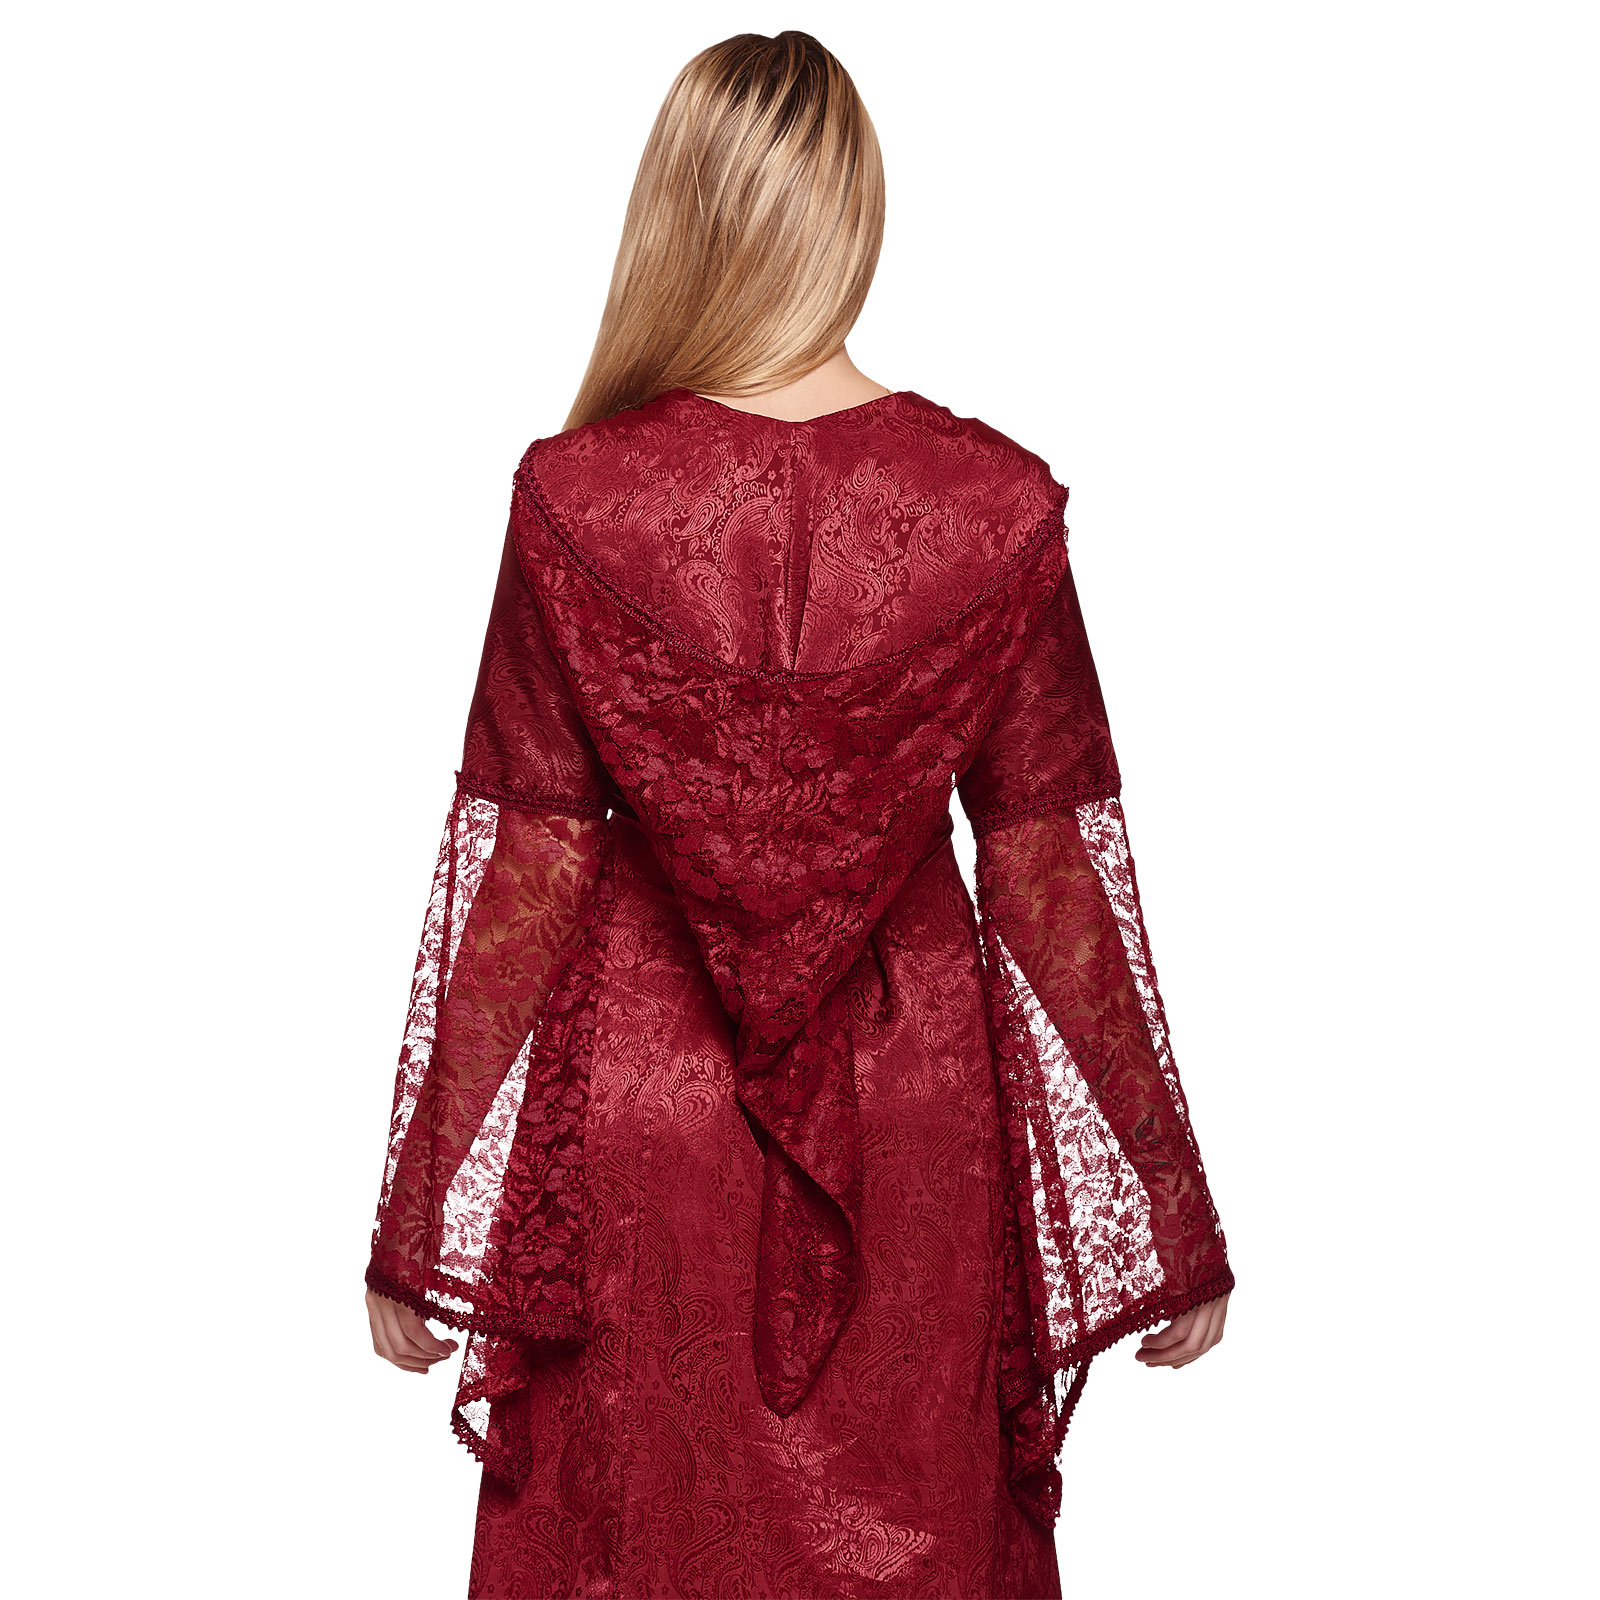 Marianna Medieval Dress red